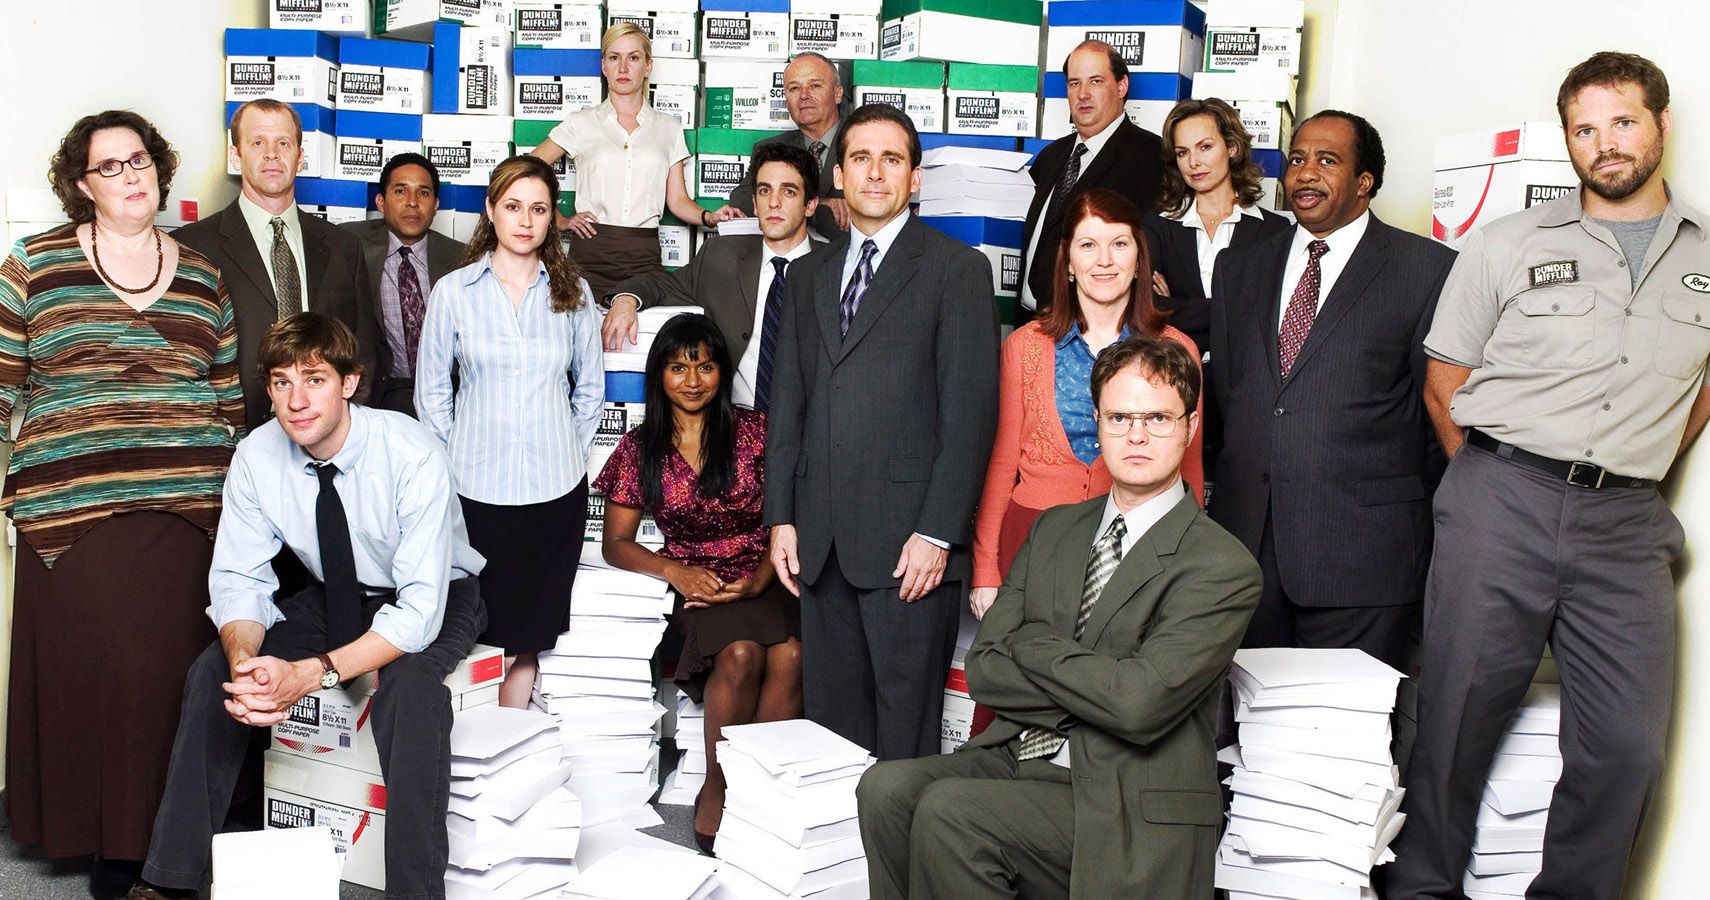 The Office Book of Lists: The Official Guide to Quotes, Pranks, Characters,  and Memorable Moments from Dunder Mifflin